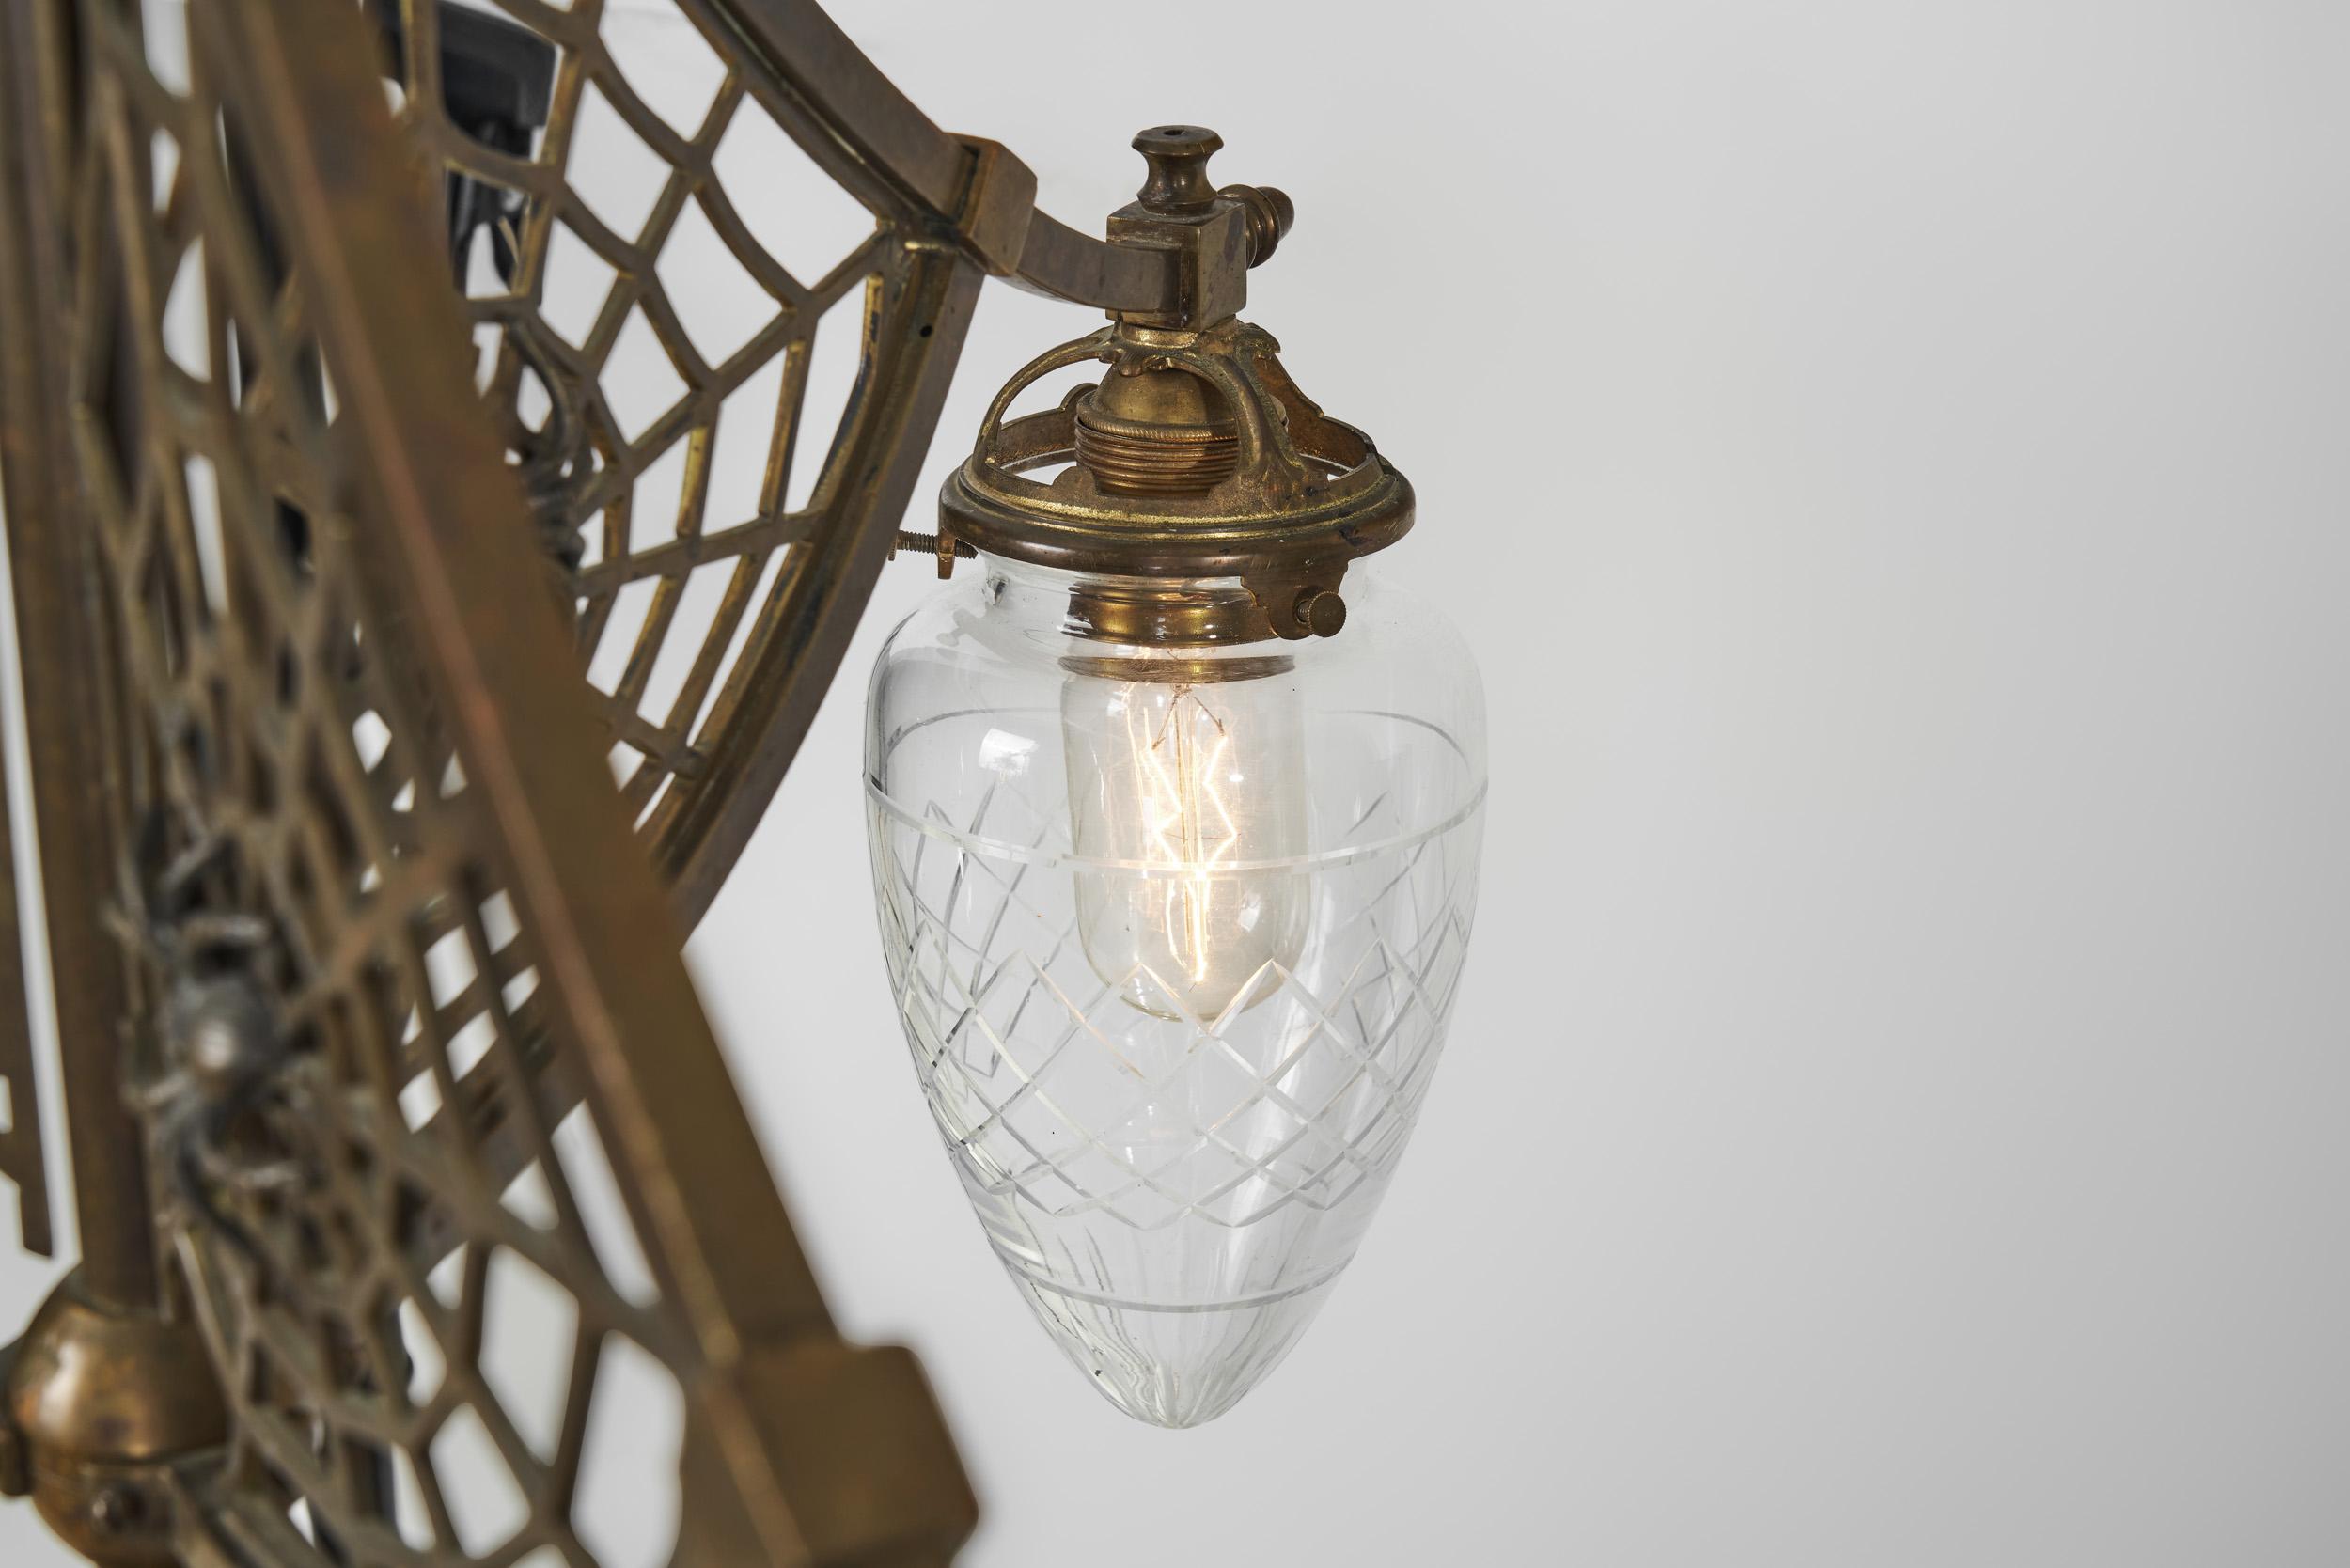 Art Nouveau Brass Ceiling Lamp with Glass Shades and Spider Nets, Europe 1900s For Sale 8